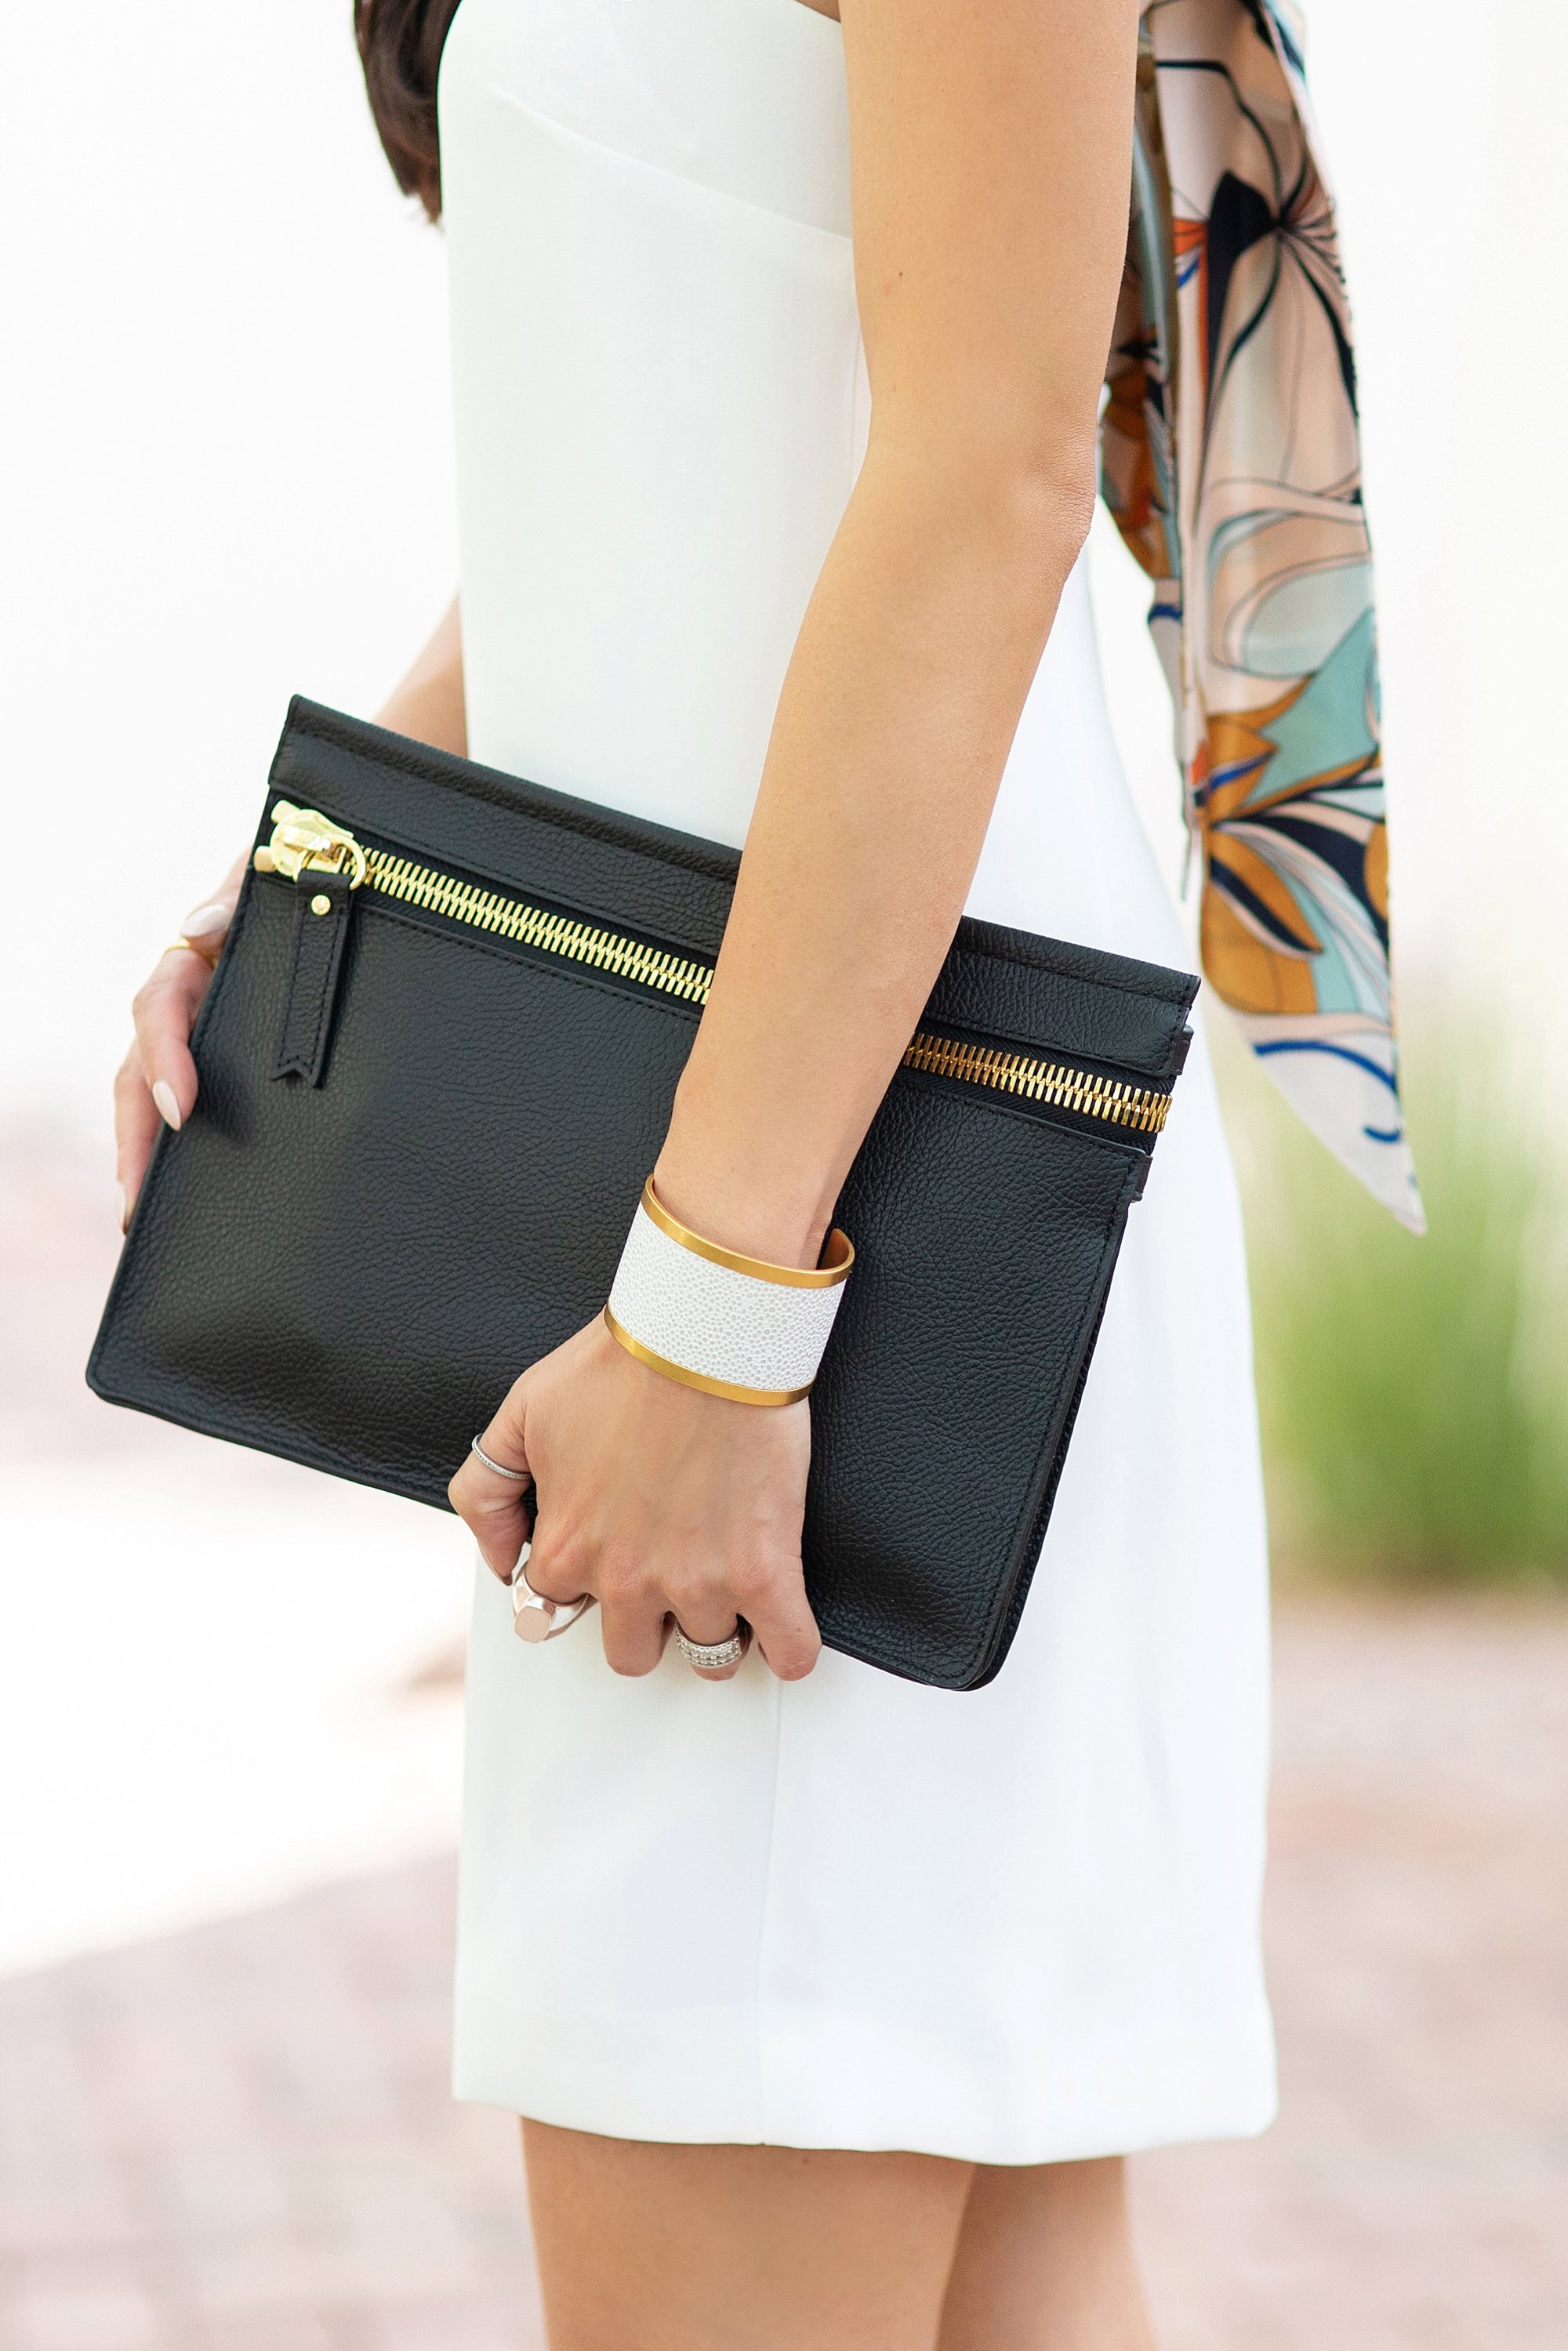 Mango Gugi2 scarf dress on blogger Diana Elizabeth in Phoenix, Arizona. Scarf dress paired a black clutch by India Hicks and white leather brass cuff and tortoise acrylic hoops